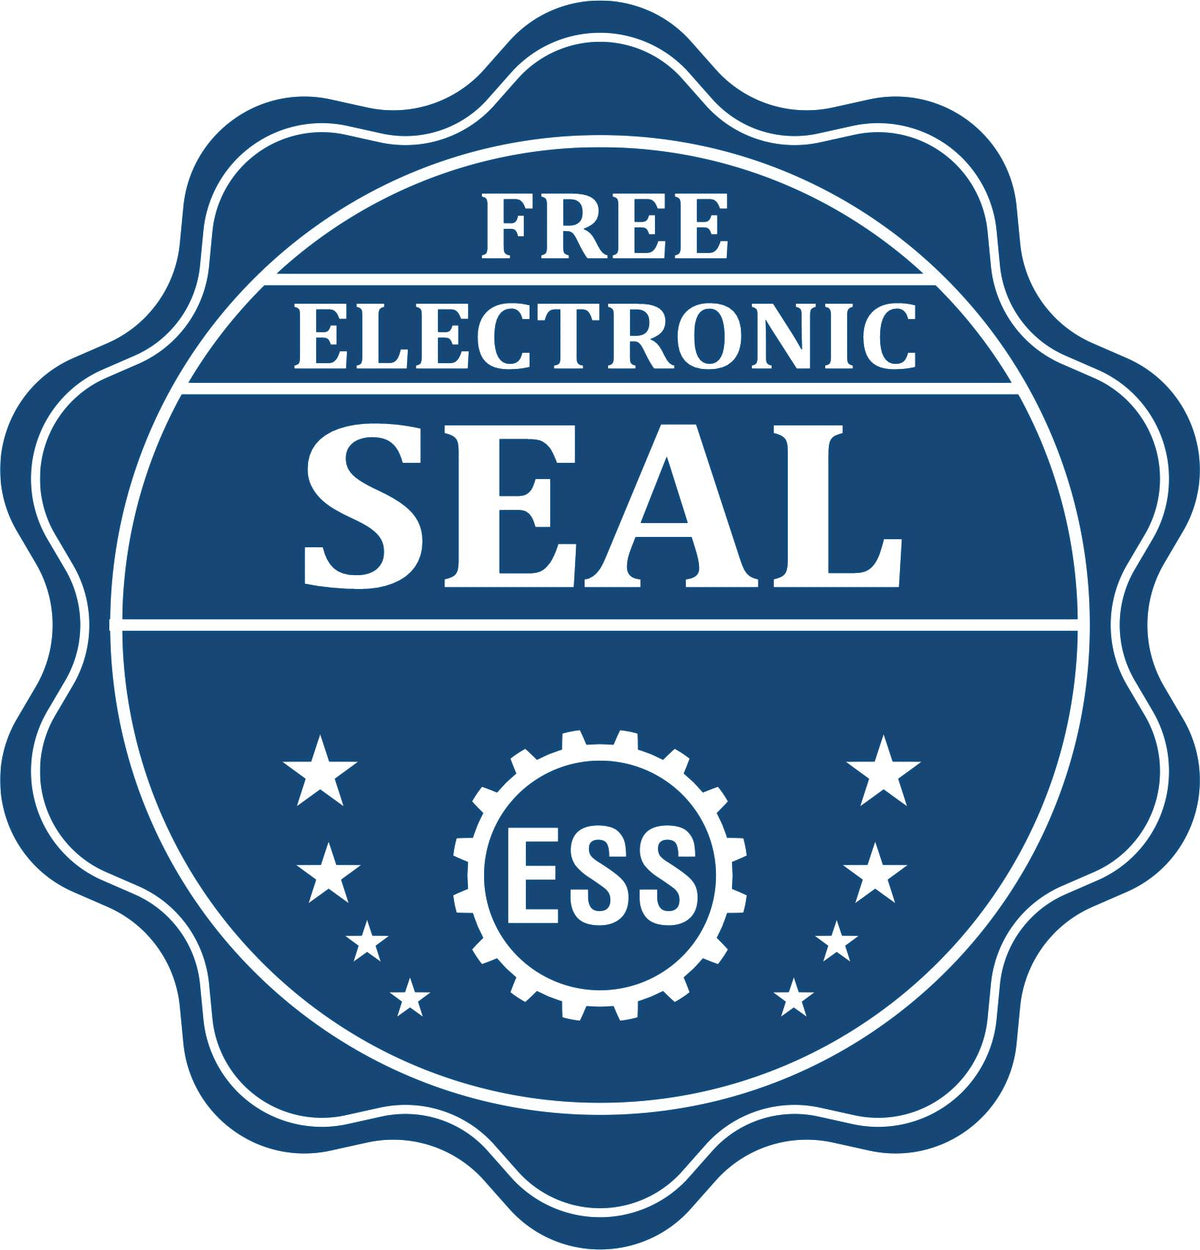 A badge showing a free electronic seal for the Hybrid Oklahoma Landscape Architect Seal with stars and the ESS gear on the emblem.